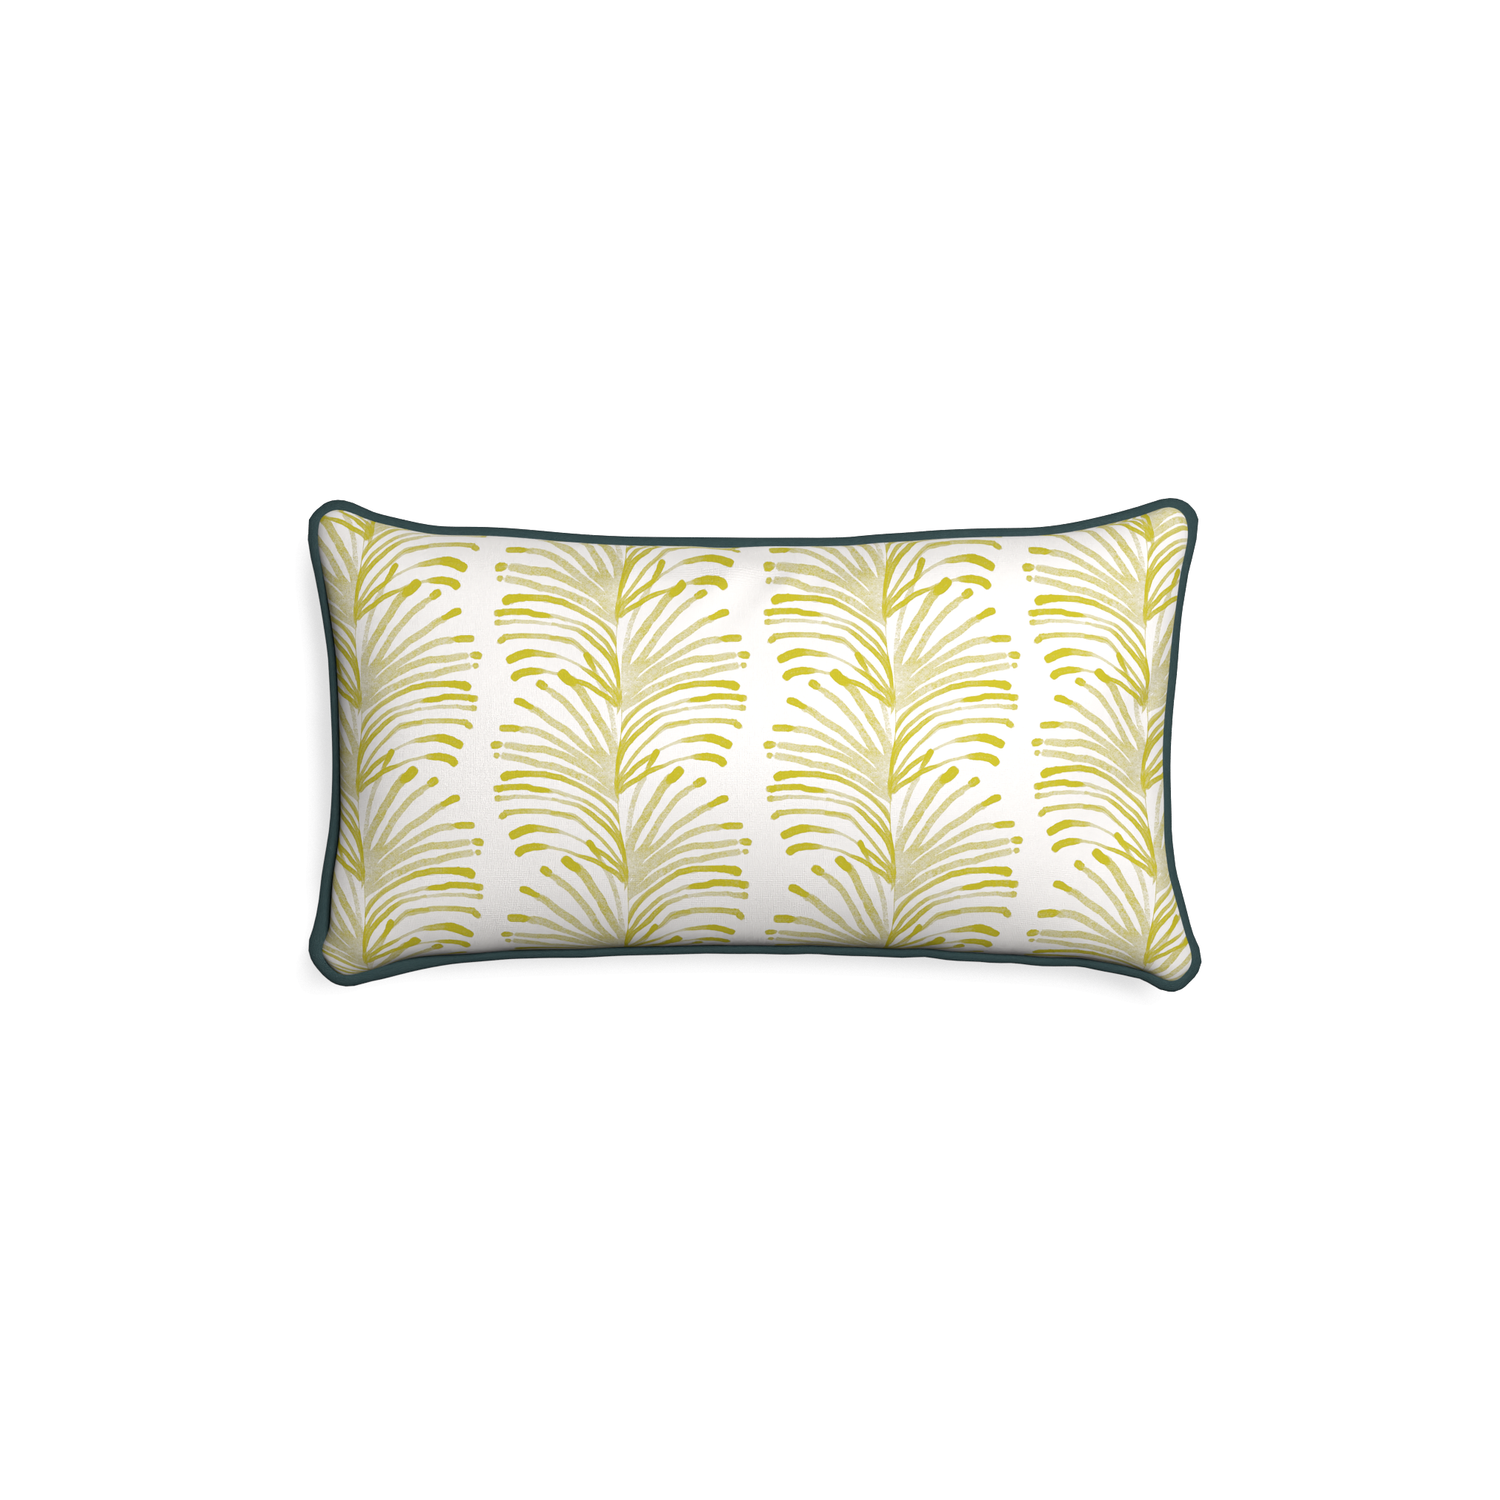 Petite-lumbar emma chartreuse custom yellow stripe chartreusepillow with p piping on white background